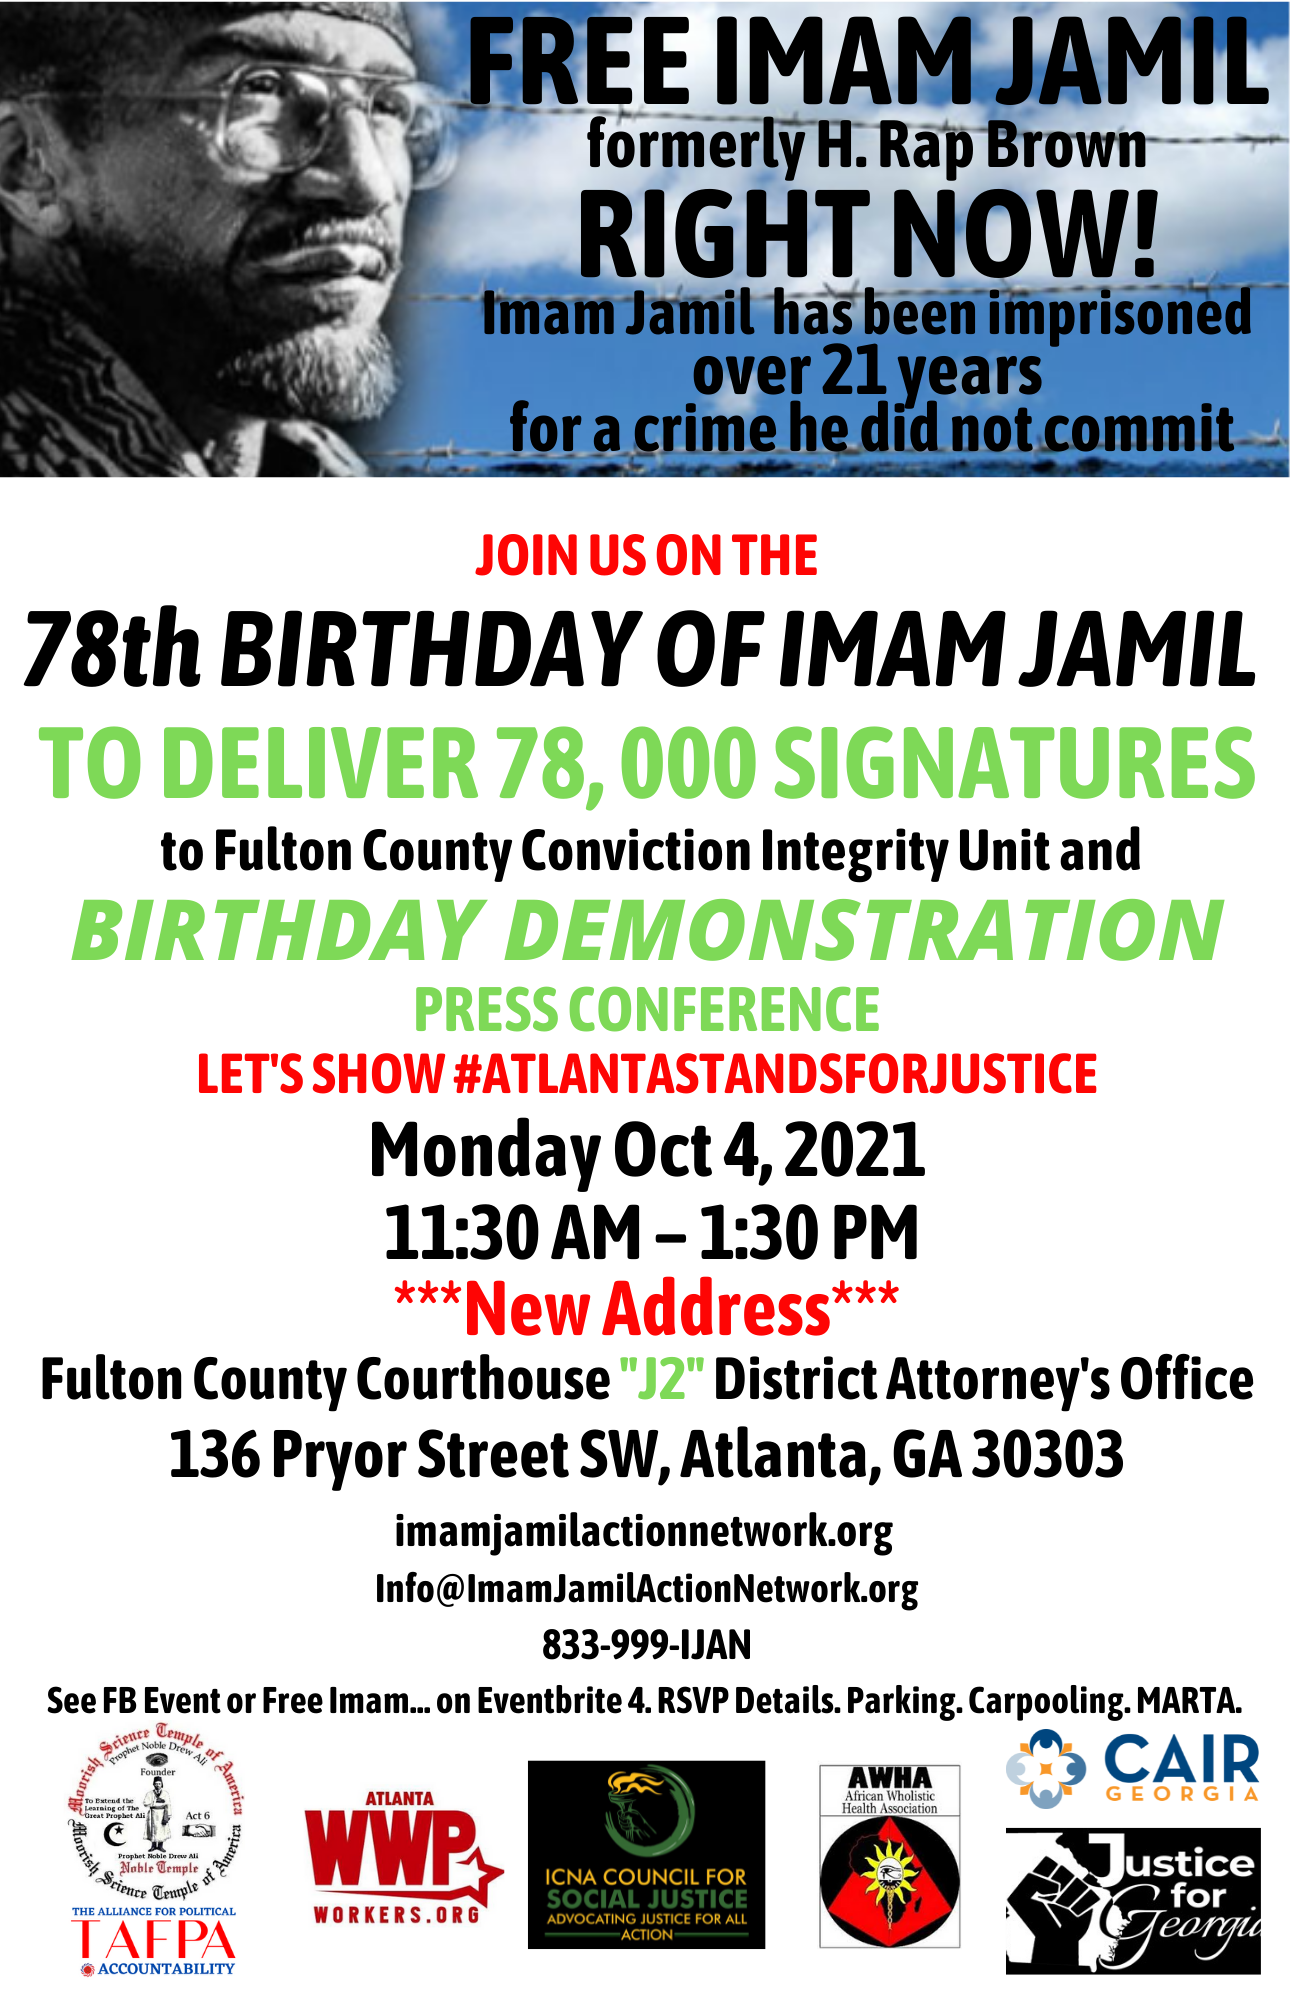 Join Us October 4th, Imam Jamil's 78th Birthday! Help Us File 78,000 Signatures with the Conviction Integrity Unit!